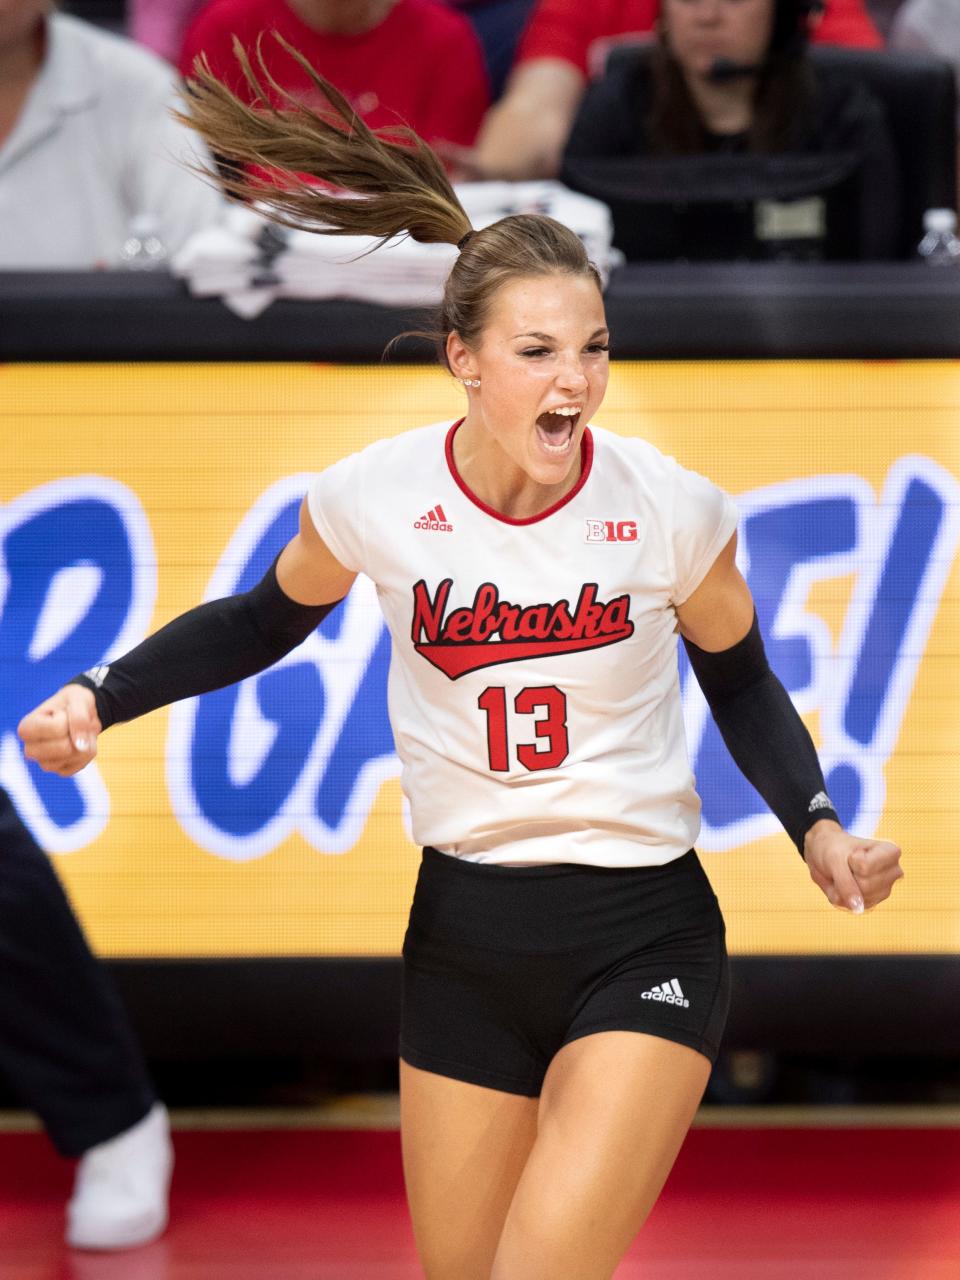 Nebraska's Whitney Lauenstein celebrates after firing a kill in a 2022 match against Ohio State. Lauenstein, who sat out the past season, announced on Tuesday that she will join the Texas volleyball program. Texas beat Nebraska 3-0 in Sunday's Division I title match.